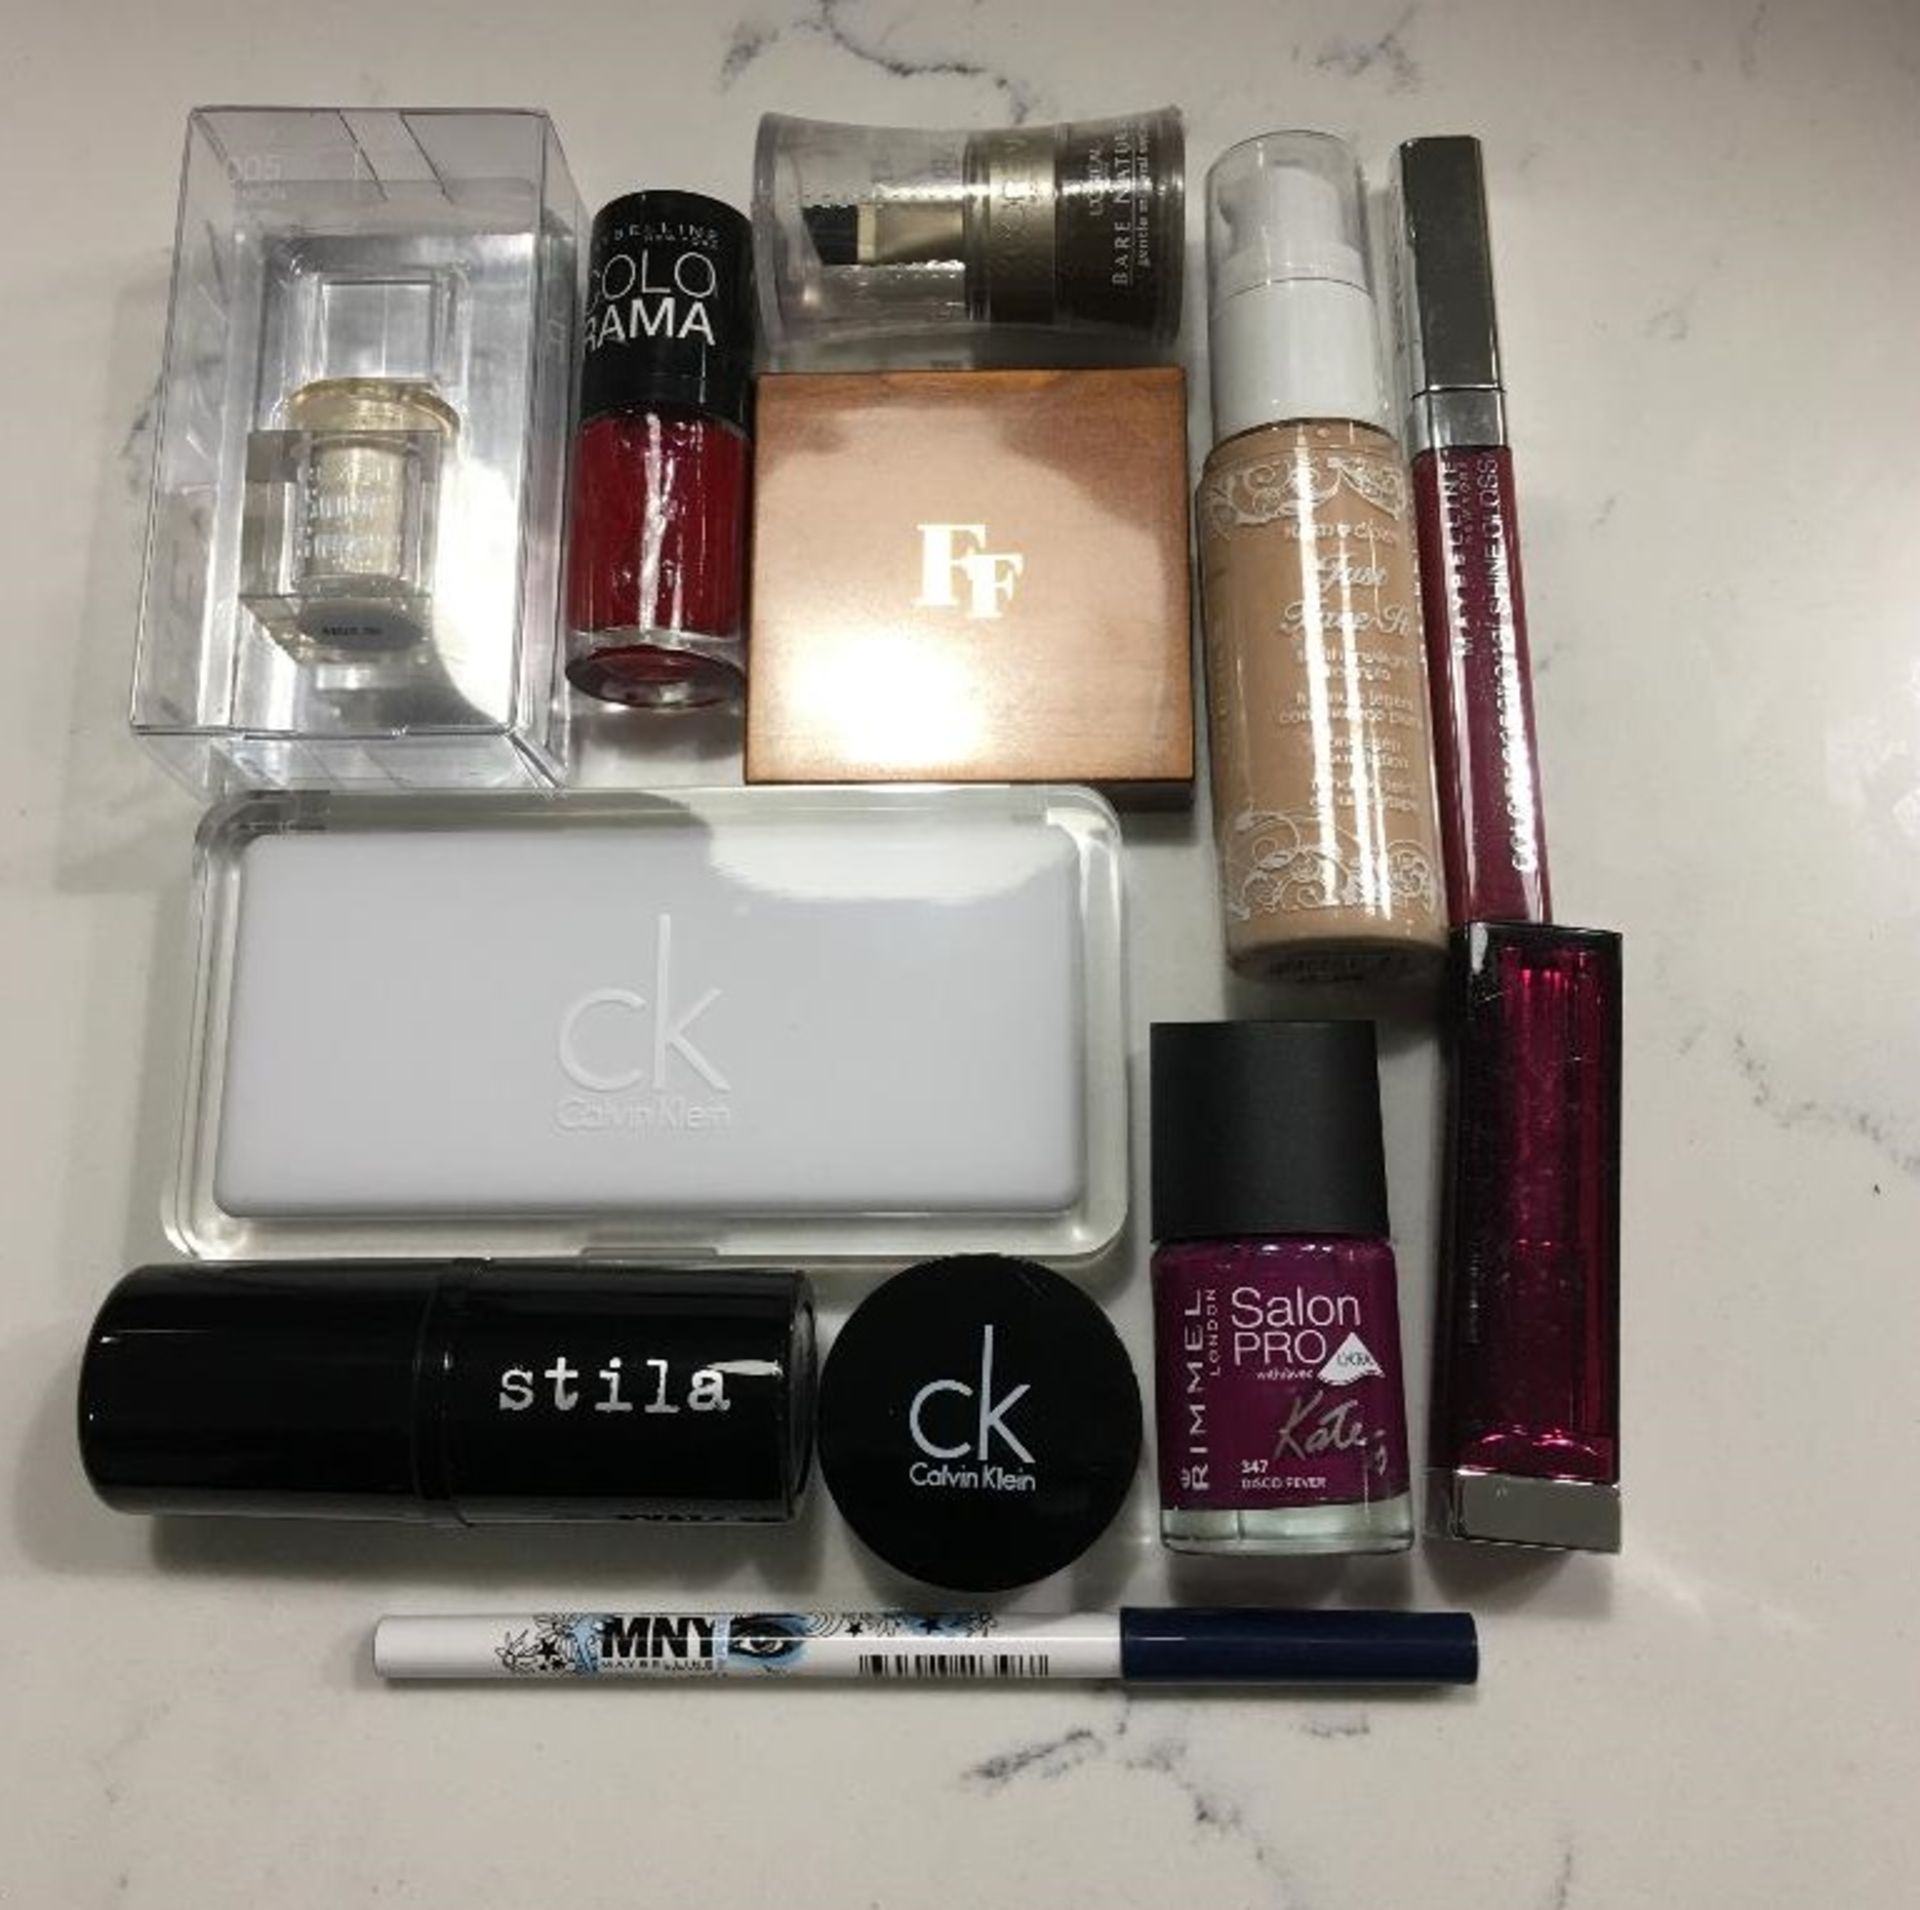 144 Full Size Cosmetics – 12 of each in the picture – NO VATUK Delivery £15